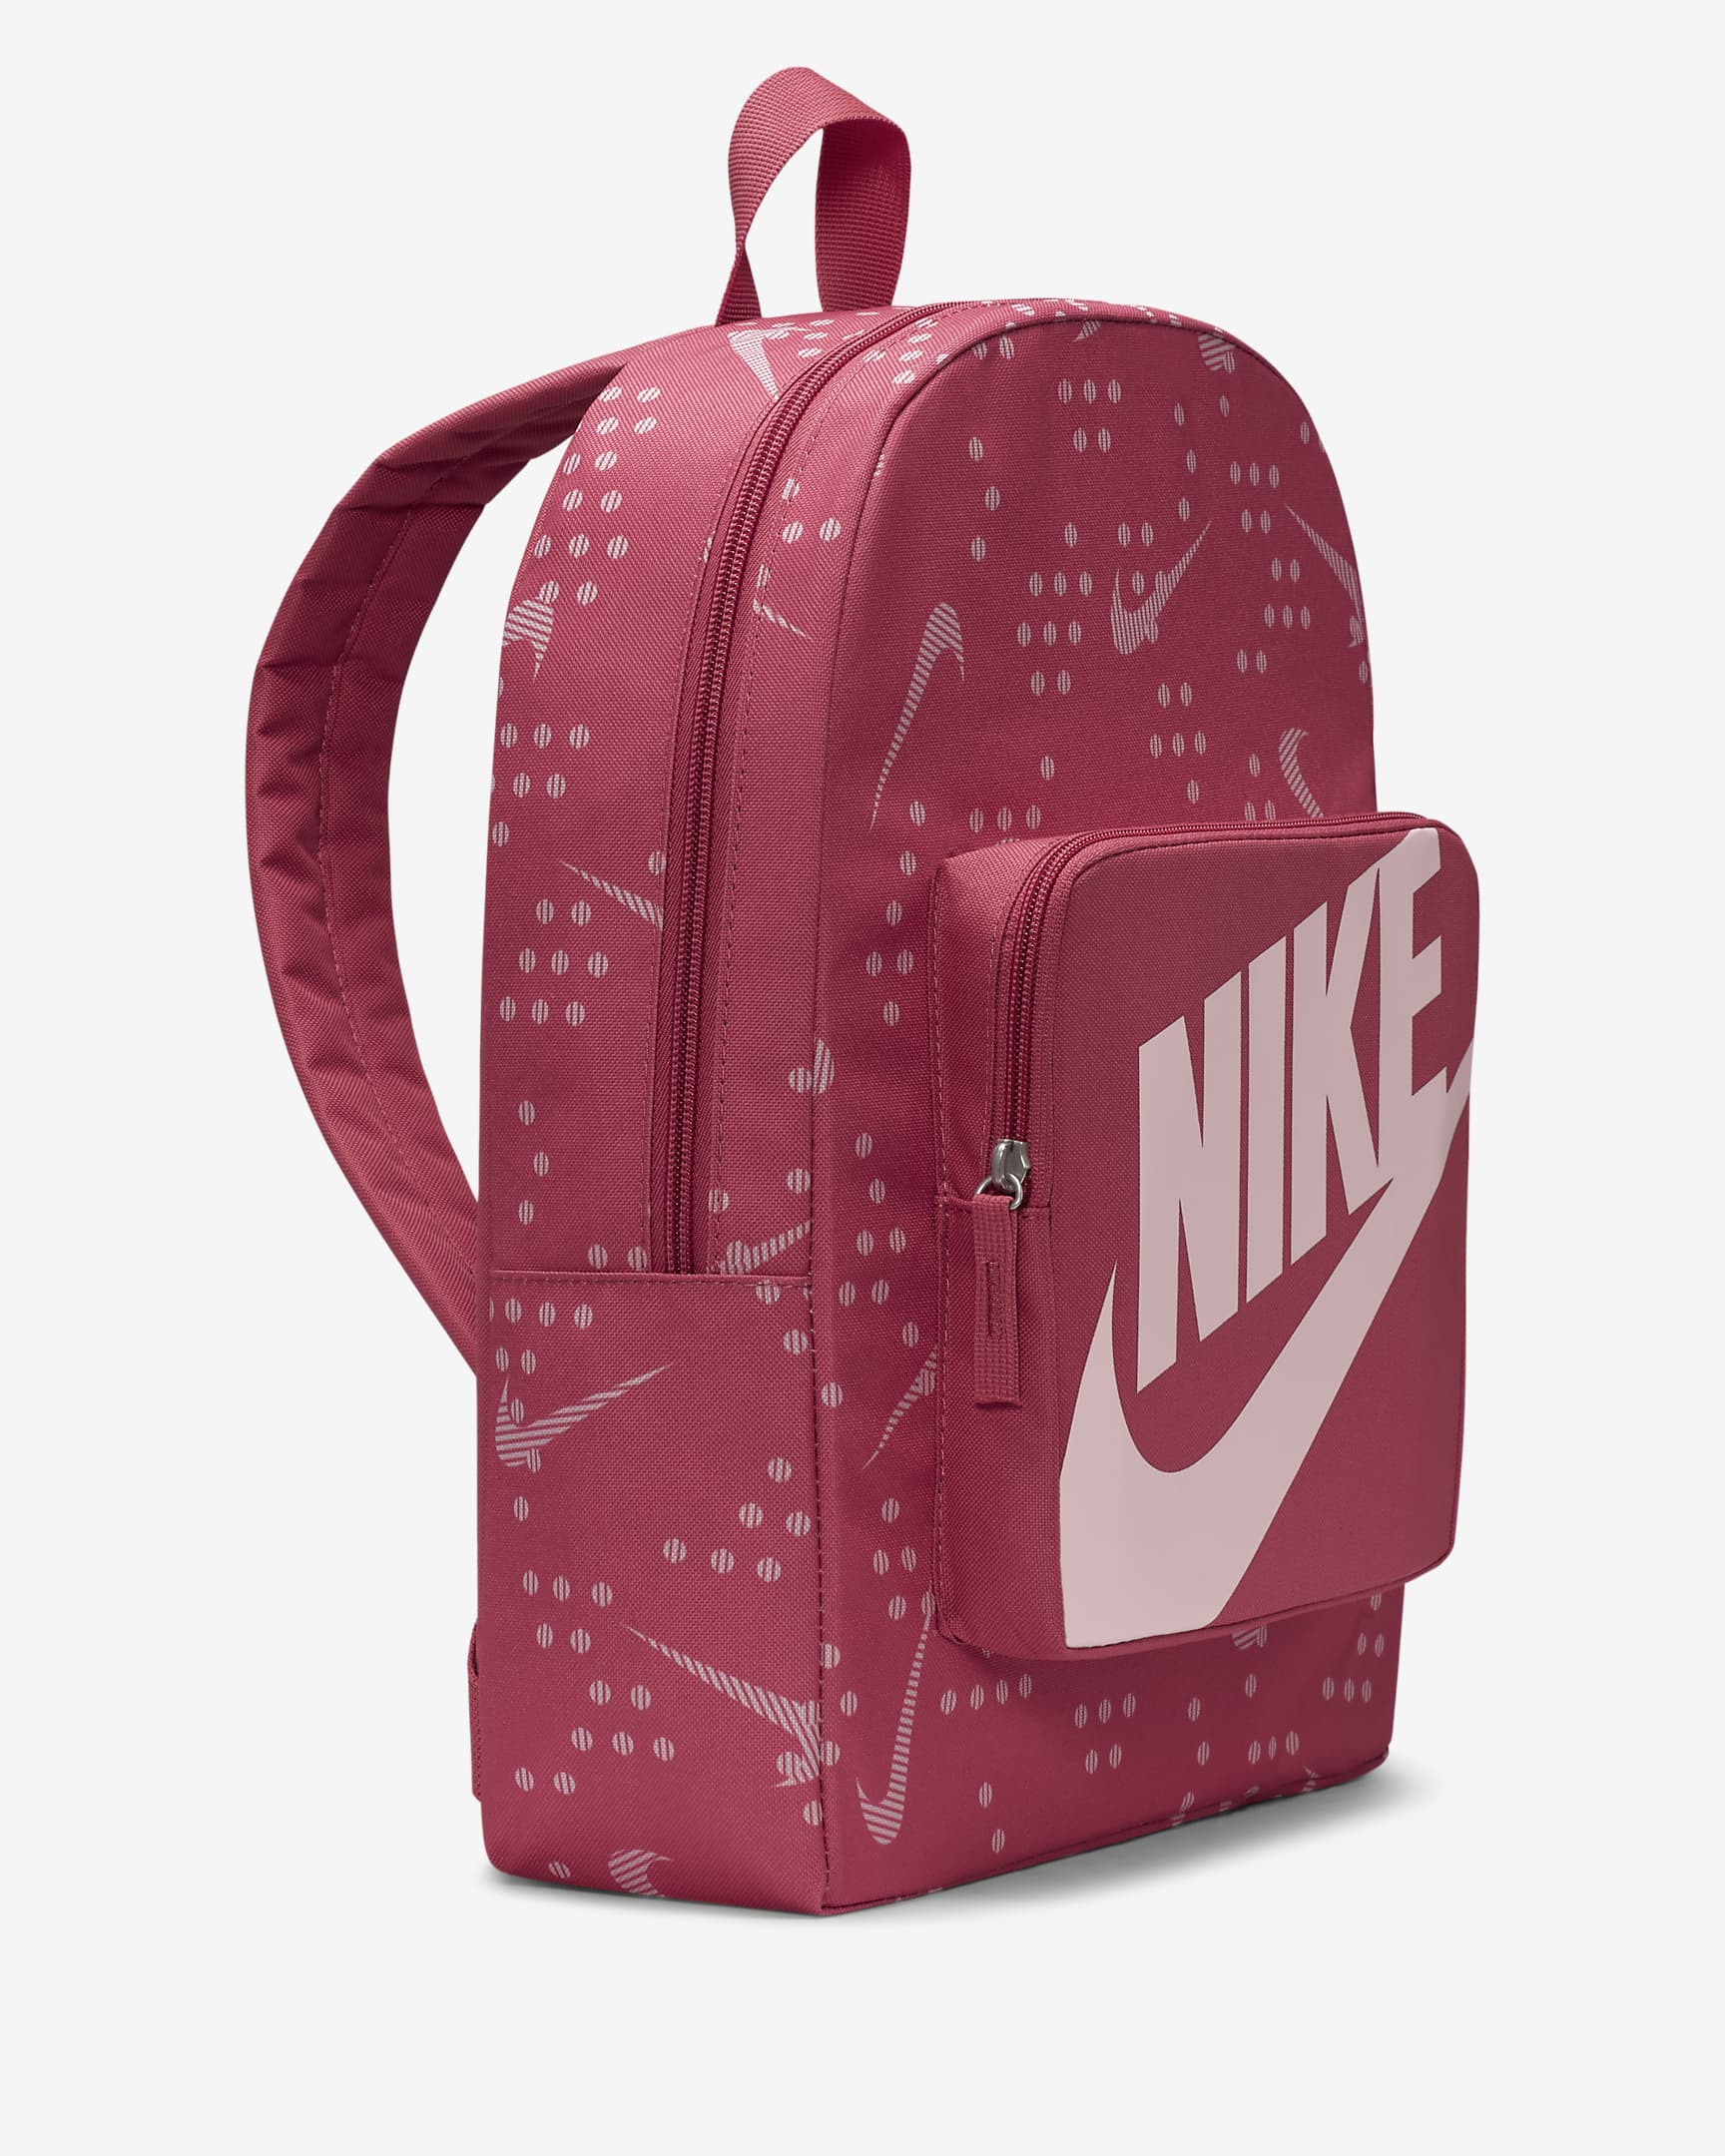 Nike Classic Kids' Backpack (16L) - Archaeo Pink/Archaeo Pink/Pink Glaze